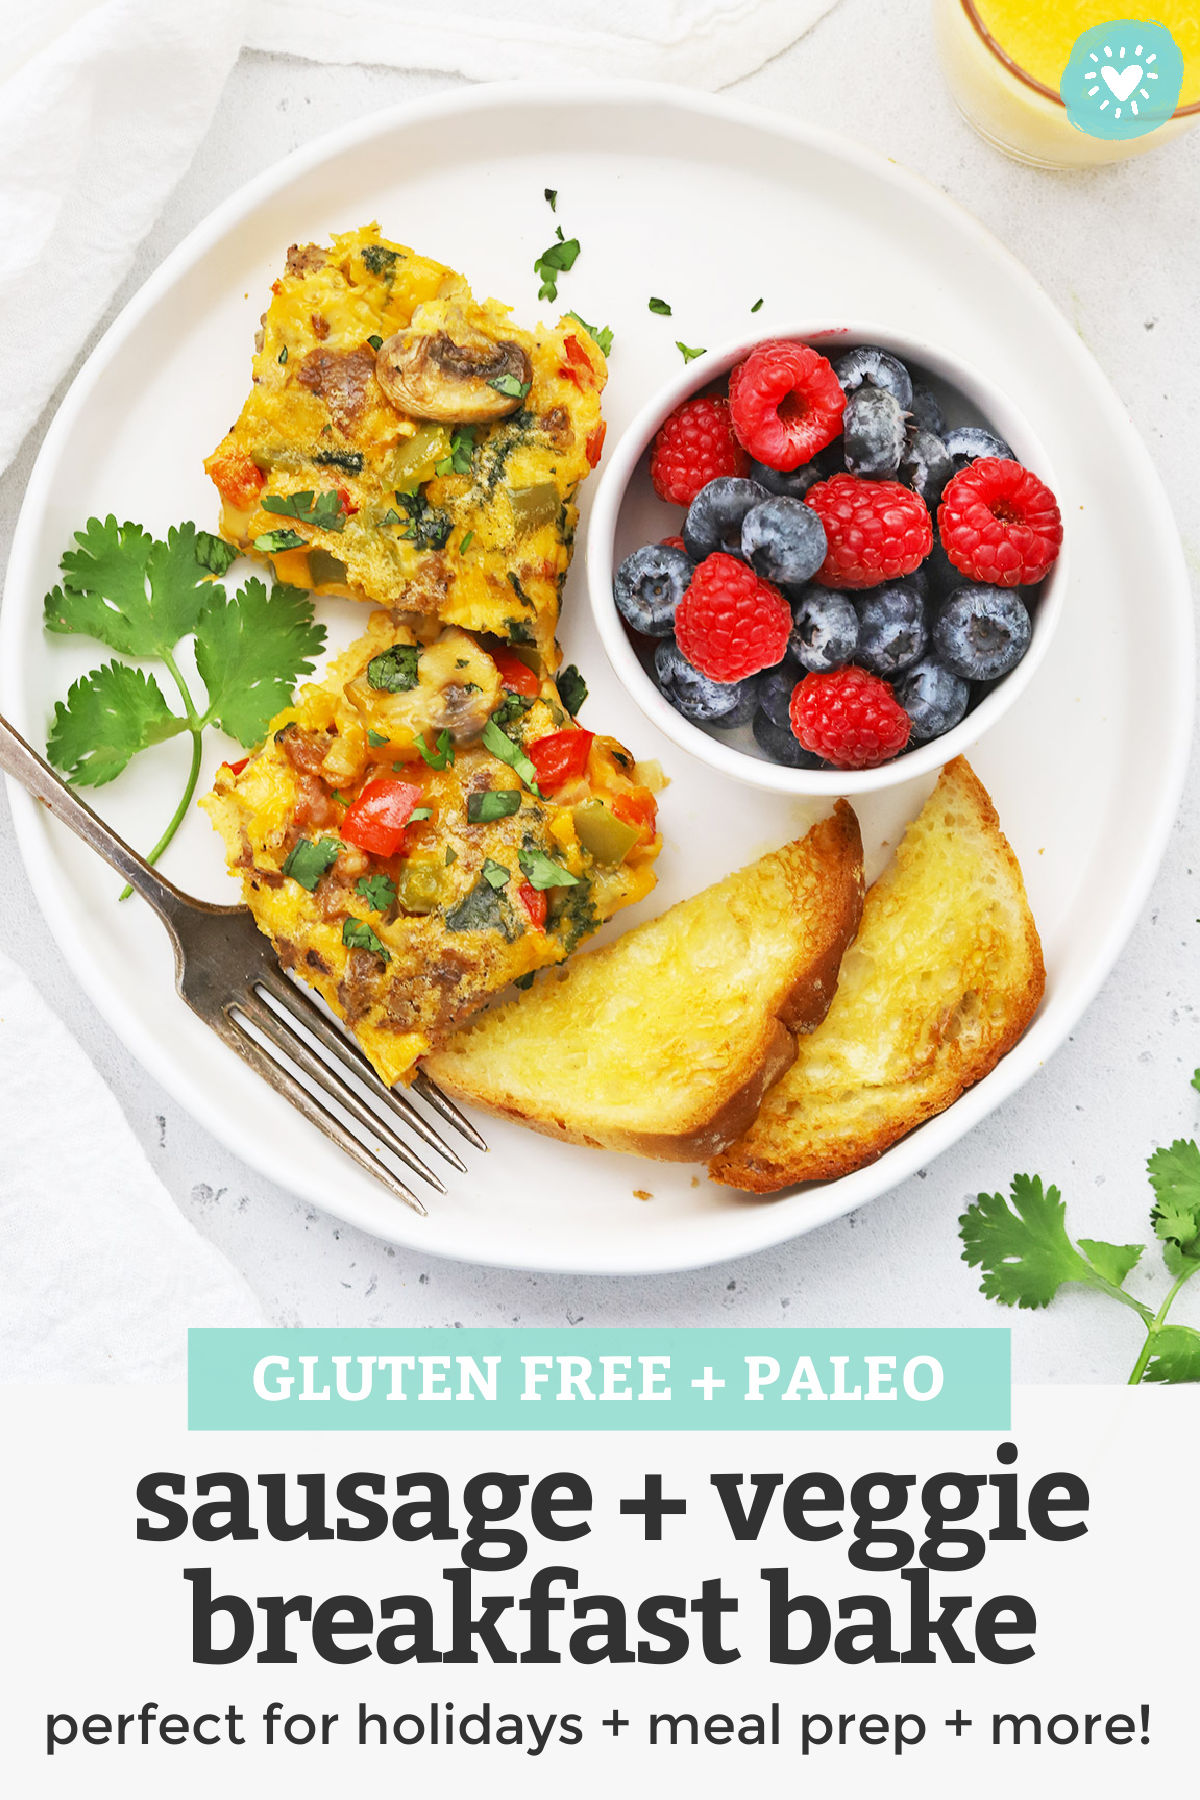 Sausage and Veggie Breakfast Bake - This cozy sausage veggie breakfast casserole is perfect for holidays, get-togethers, or meal prep. It reheats like a dream and tastes fantastic! // Meal prep breakfast // Paleo egg casserole // whole30 breakfast casserole #breakfast #eggcasserole #eggbake #paleo #whole30 #breakfastbake